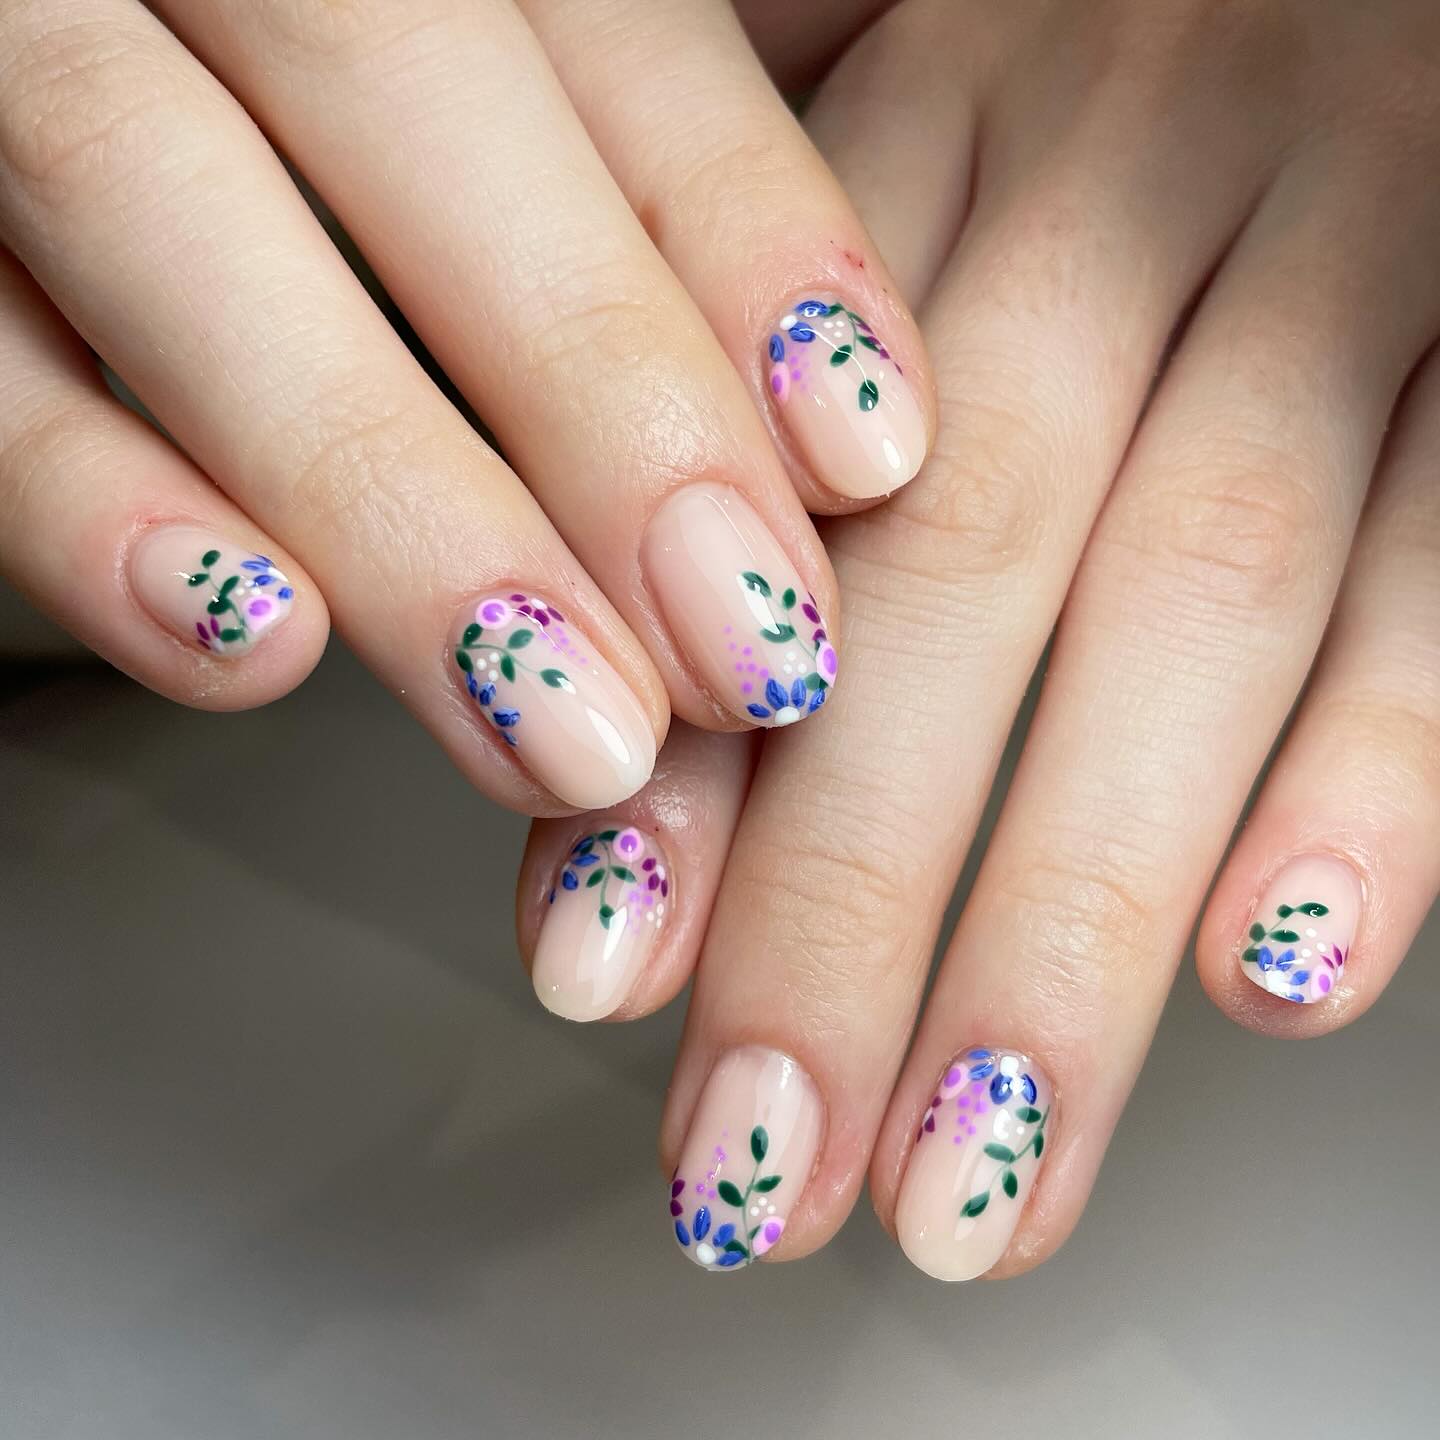 100 Pretty Spring Nail Designs To Try This Year images 67